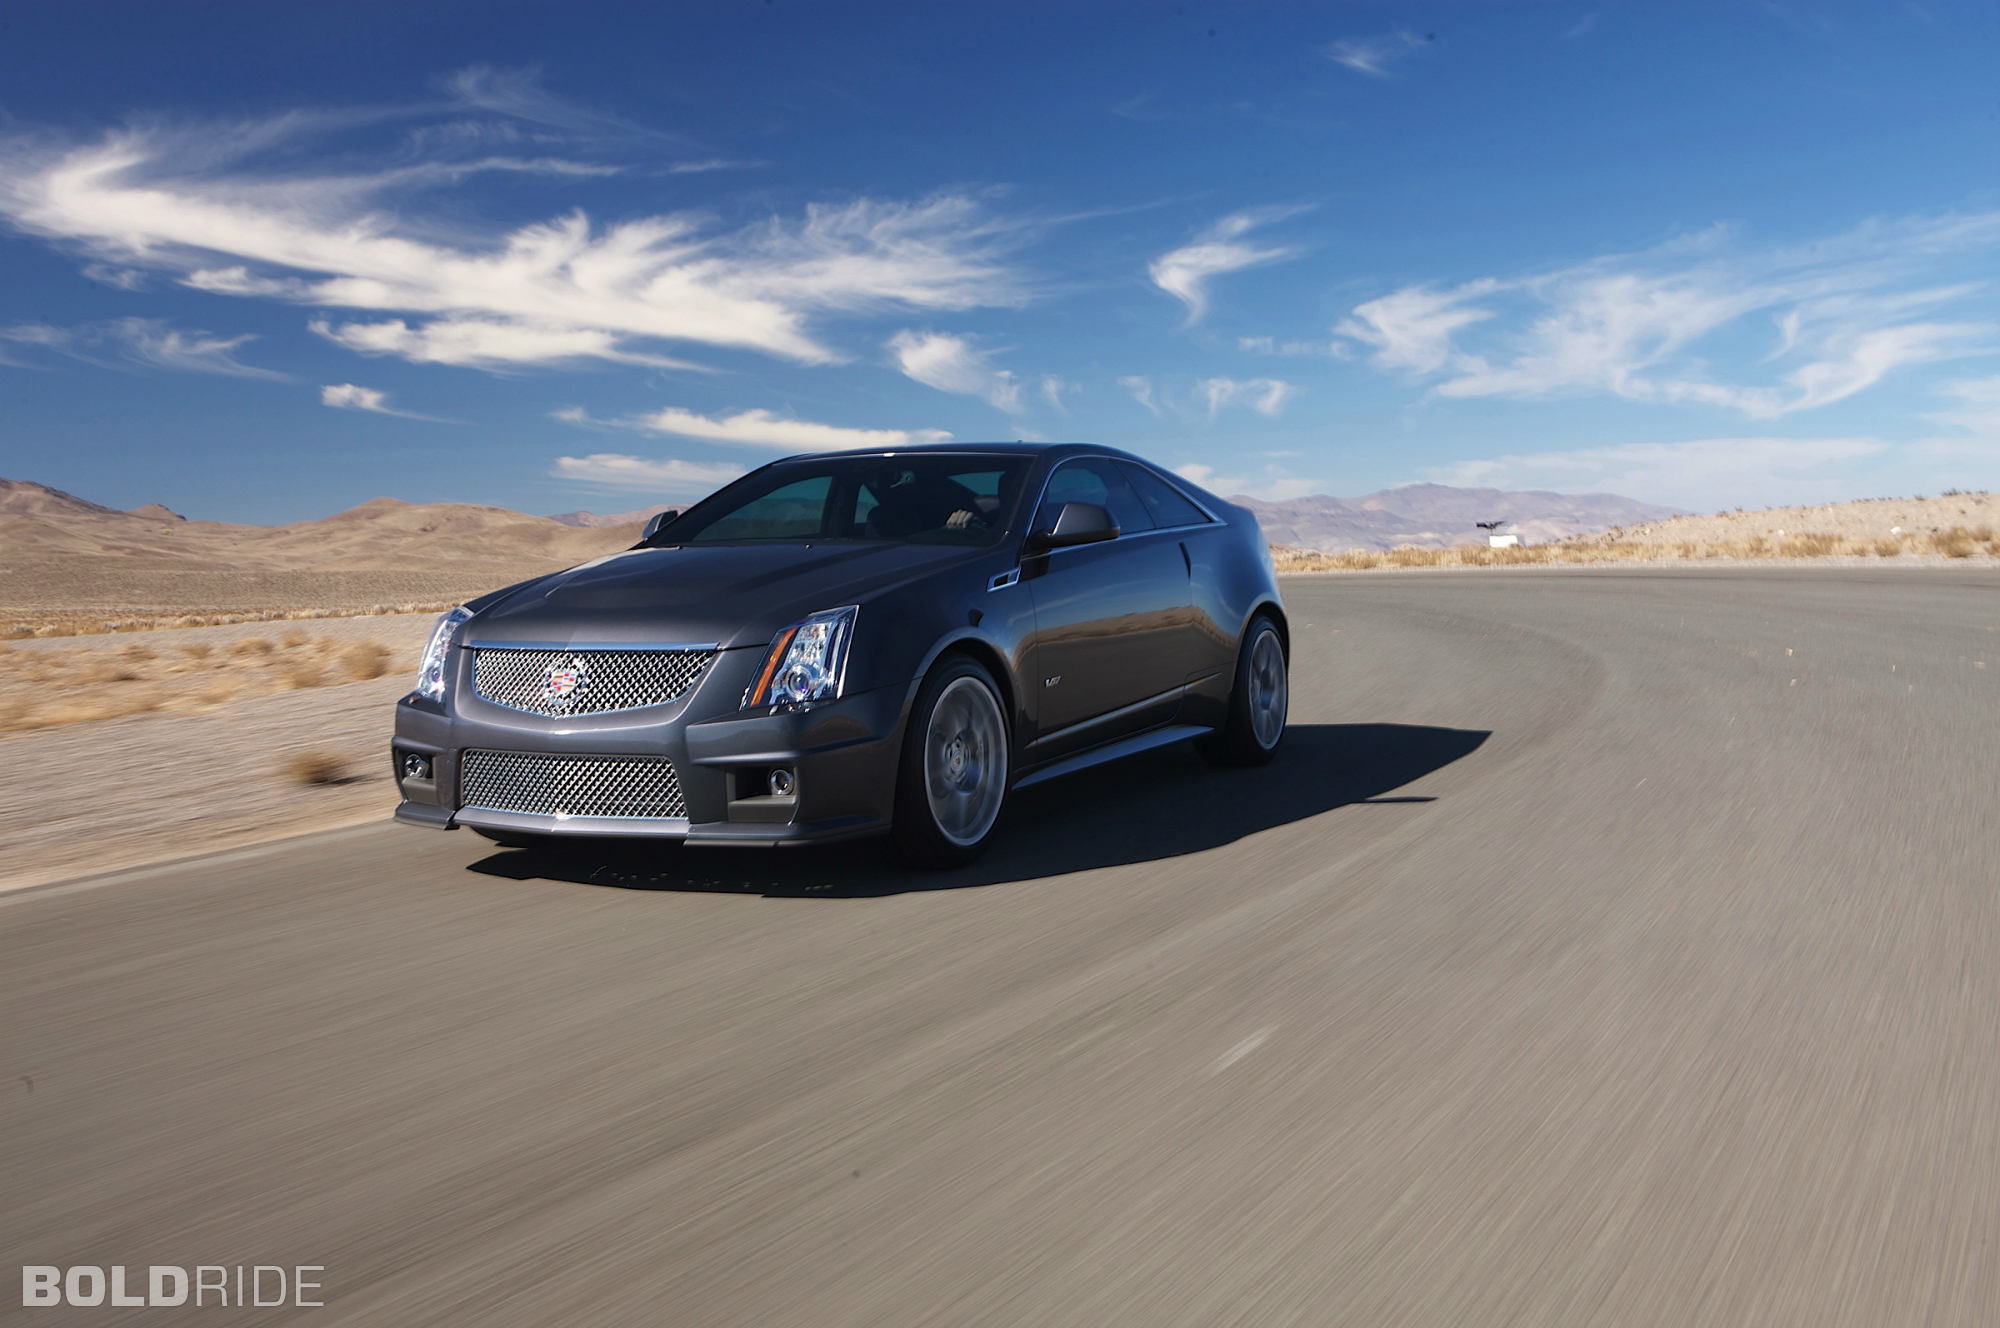 2014, Cadillac, Cts v, Coupe, Muscle, Sportcar Wallpaper